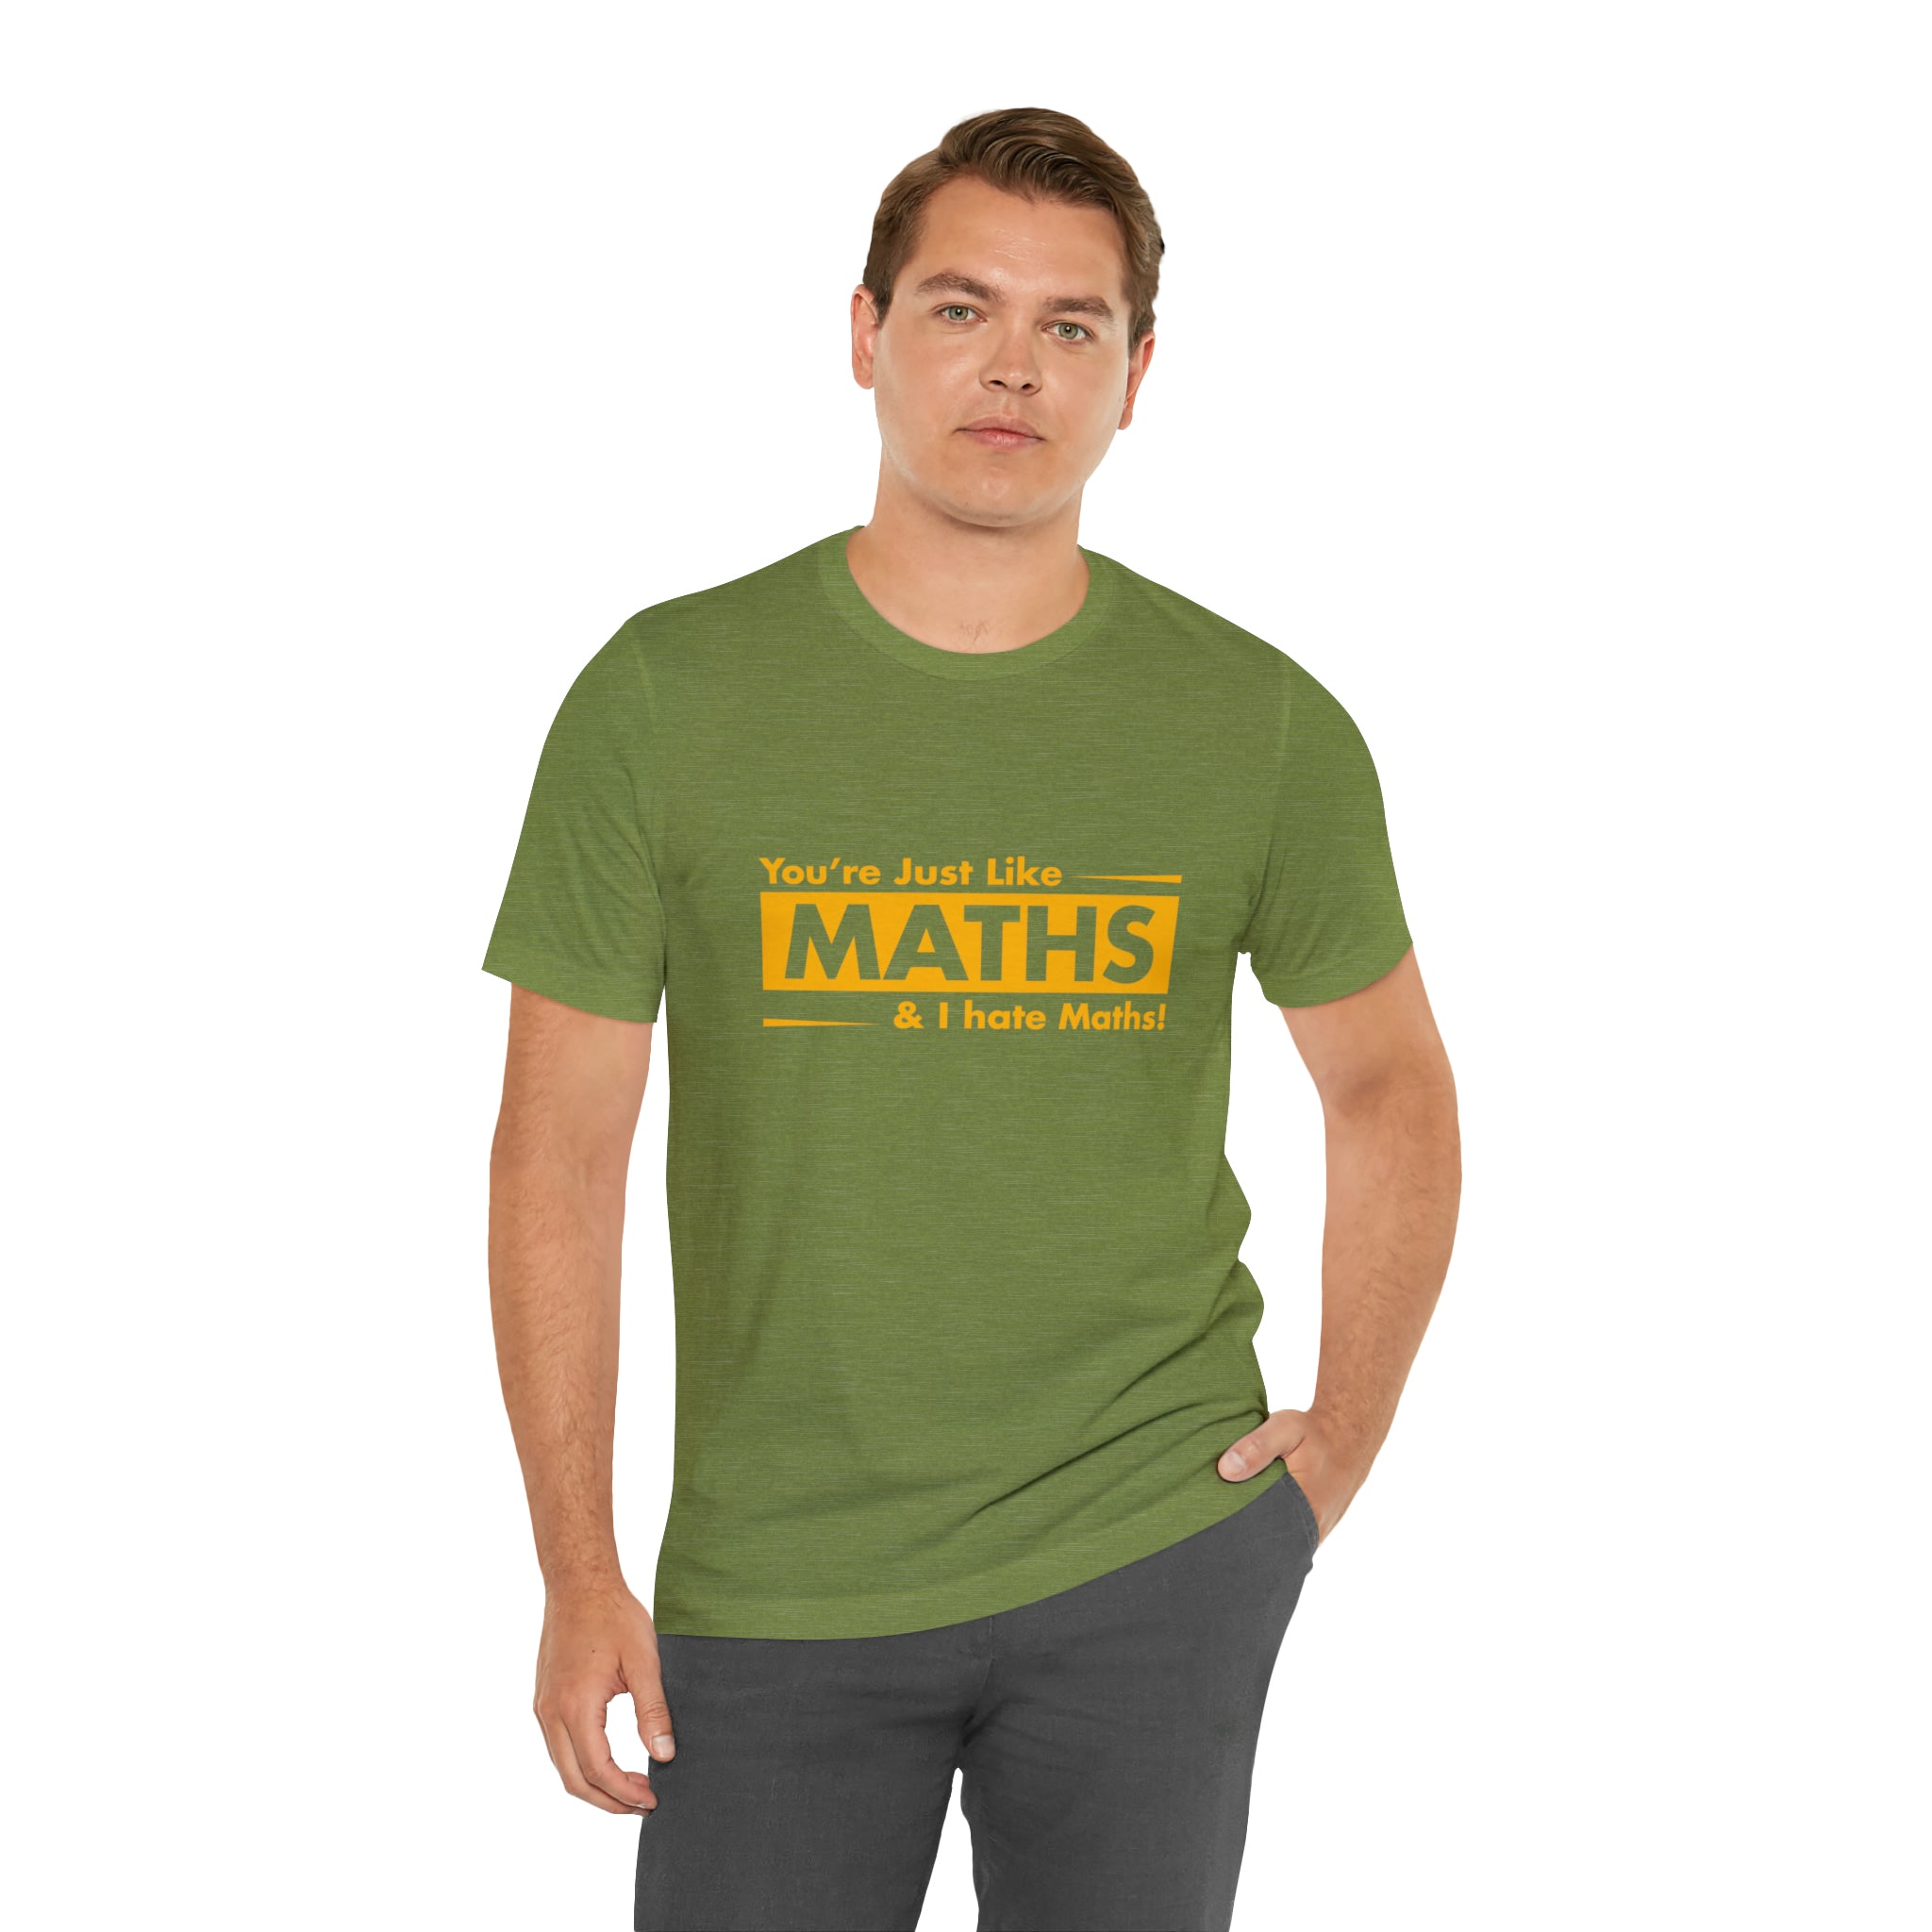 A man with a fashion sense for maths dons a green You are just like maths and I hate maths T-shirt that proudly states "math is fun.